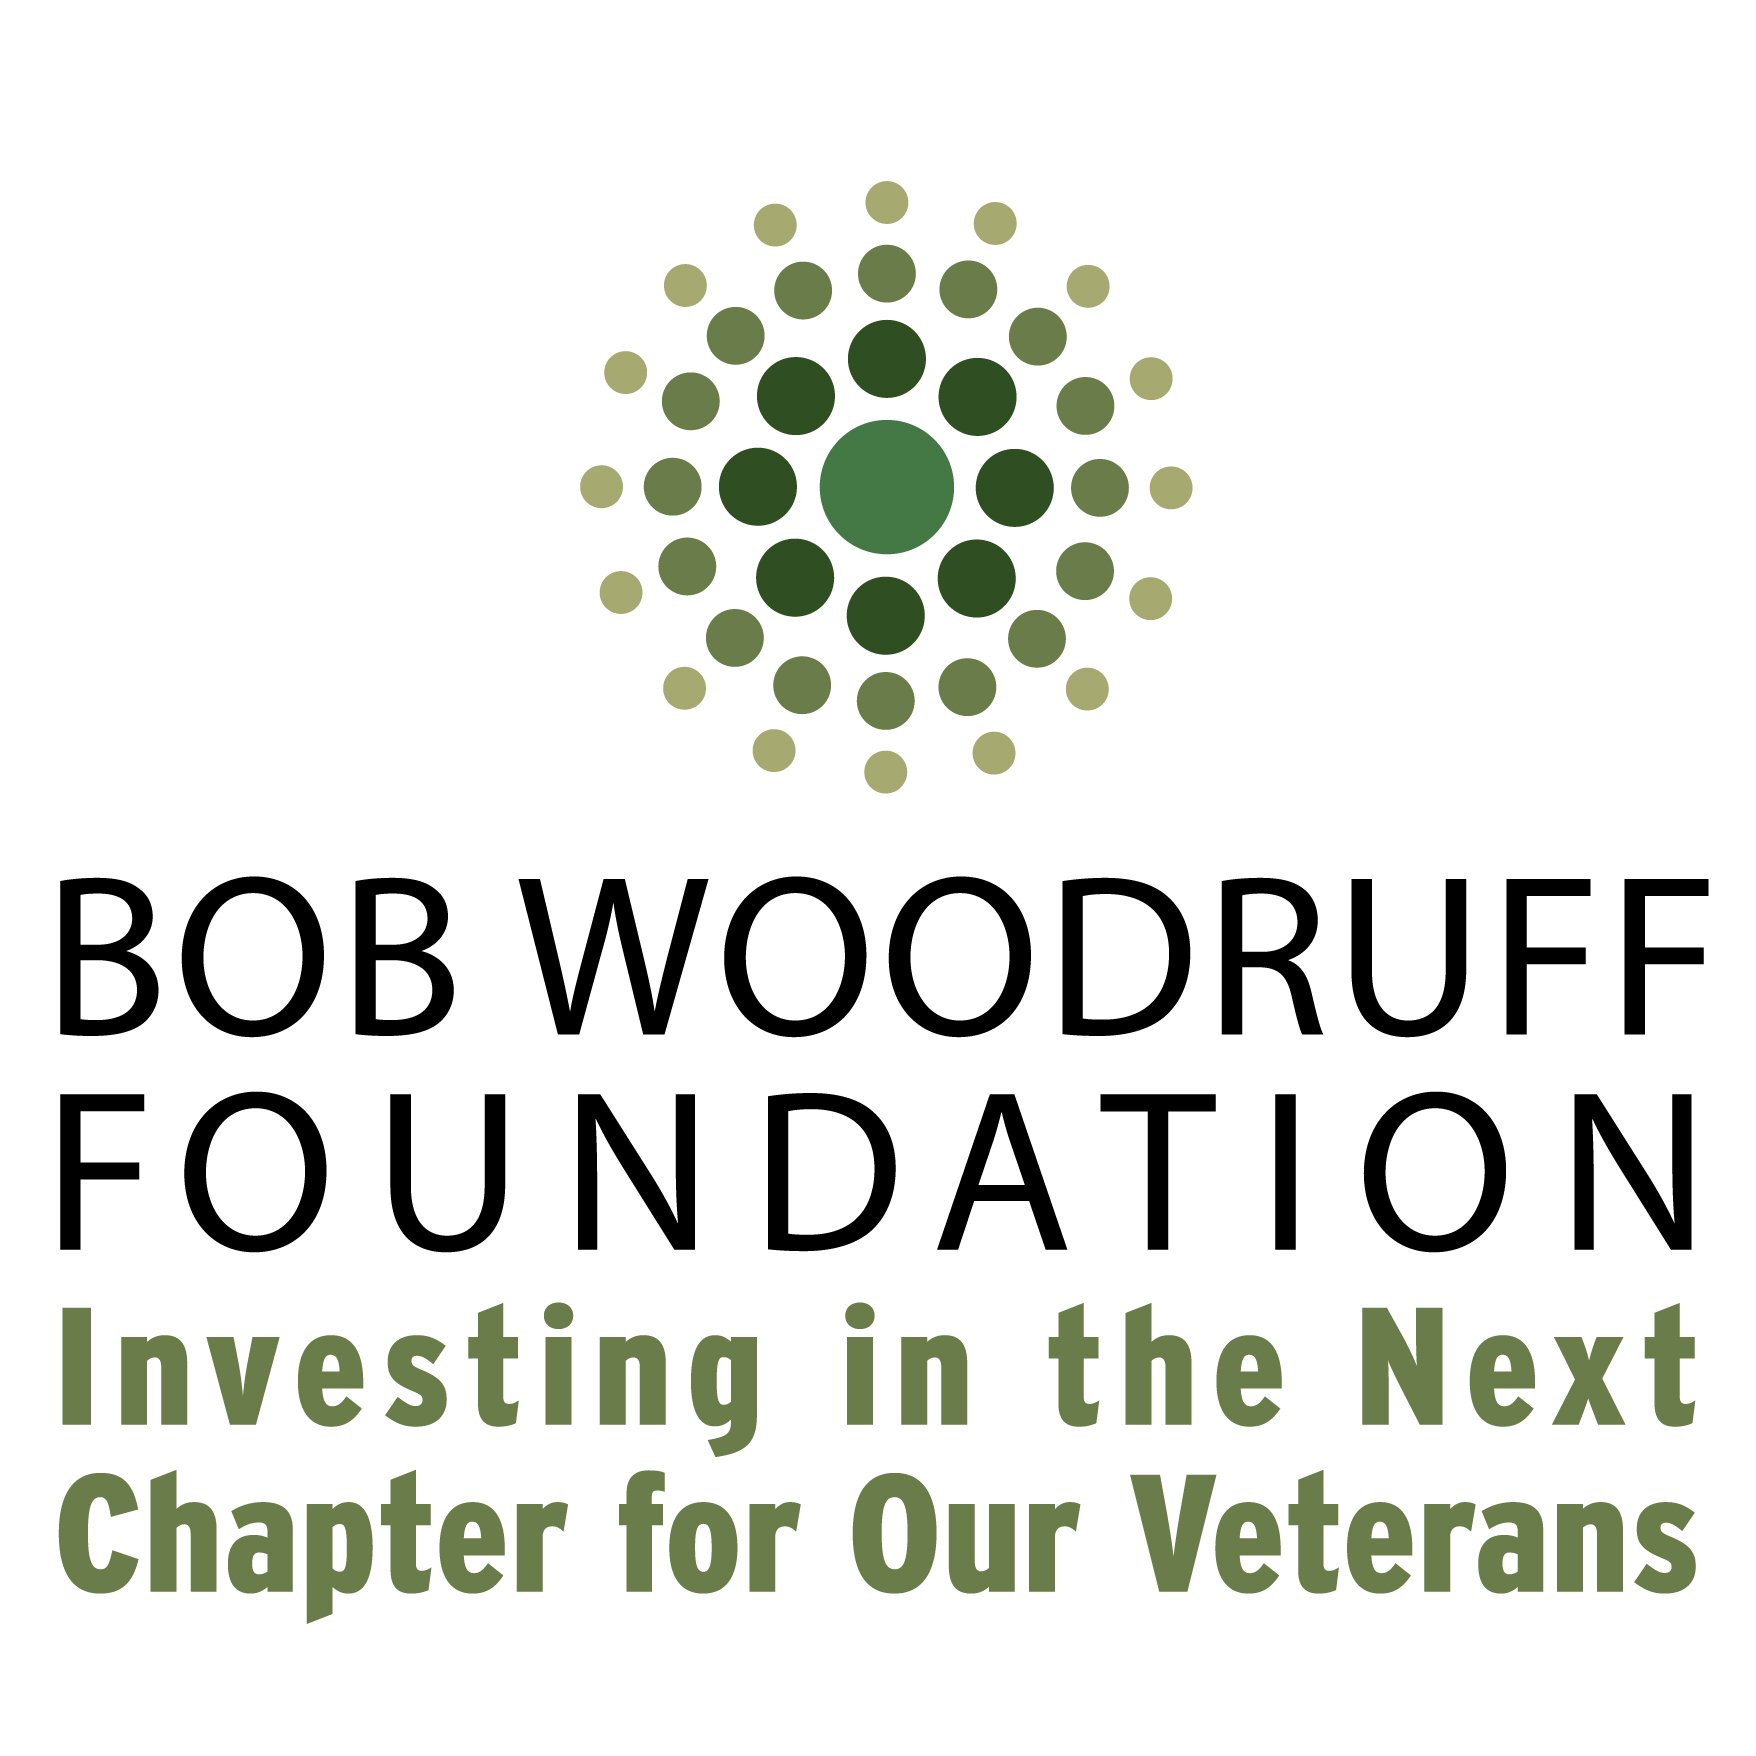 Bob Woodruff Foundation, Investing in the Next Chapter for our Veterans logo.